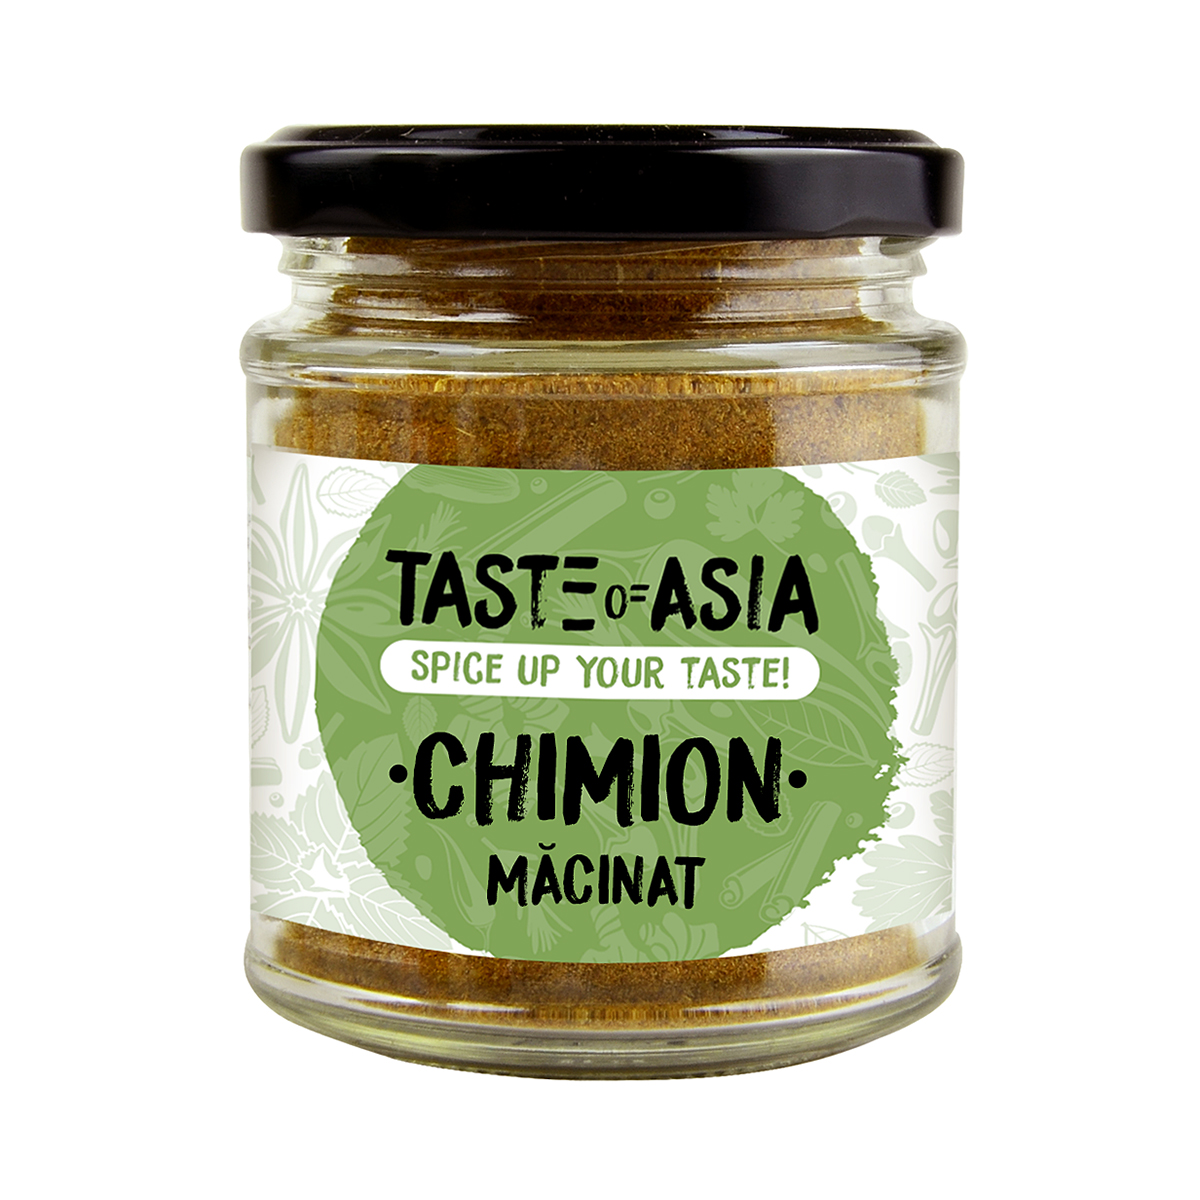 Private Label Taste of Asia - Chimion macinat TOA 70g, asianfood.ro